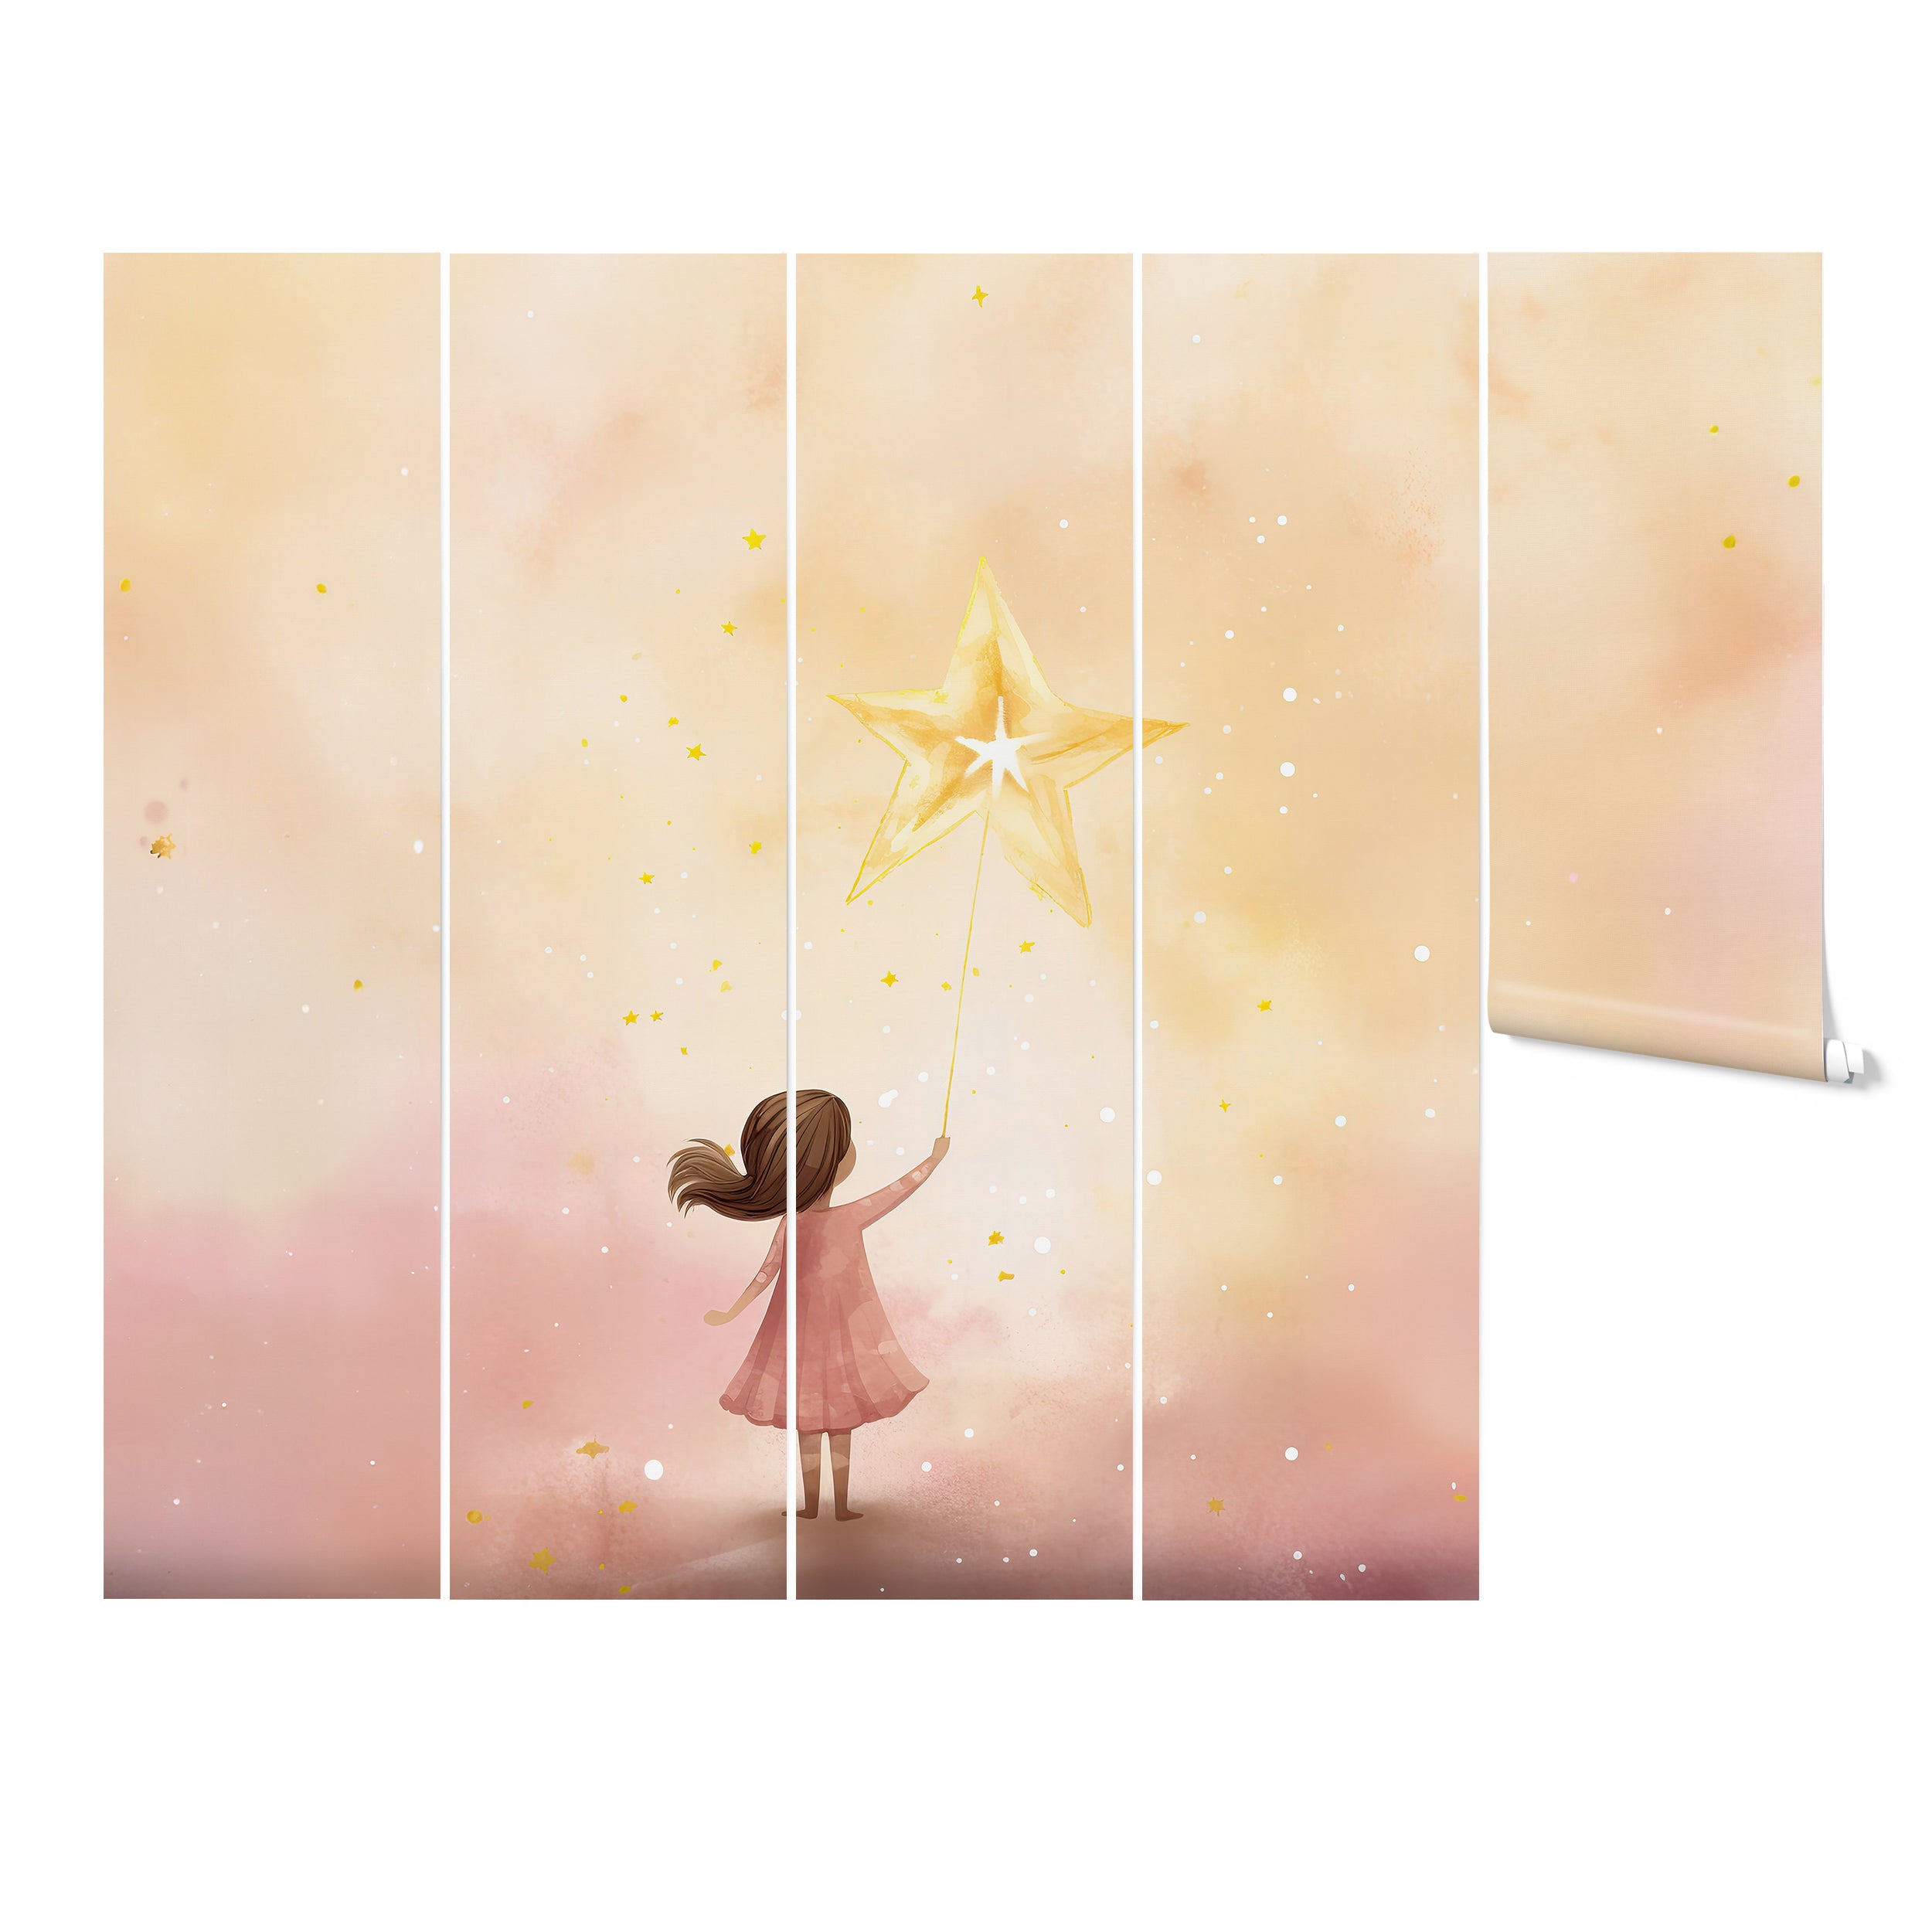 "Five-panel display of 'My Guiding Star Mural' featuring a child under a starry sky in a serene bedroom setting."